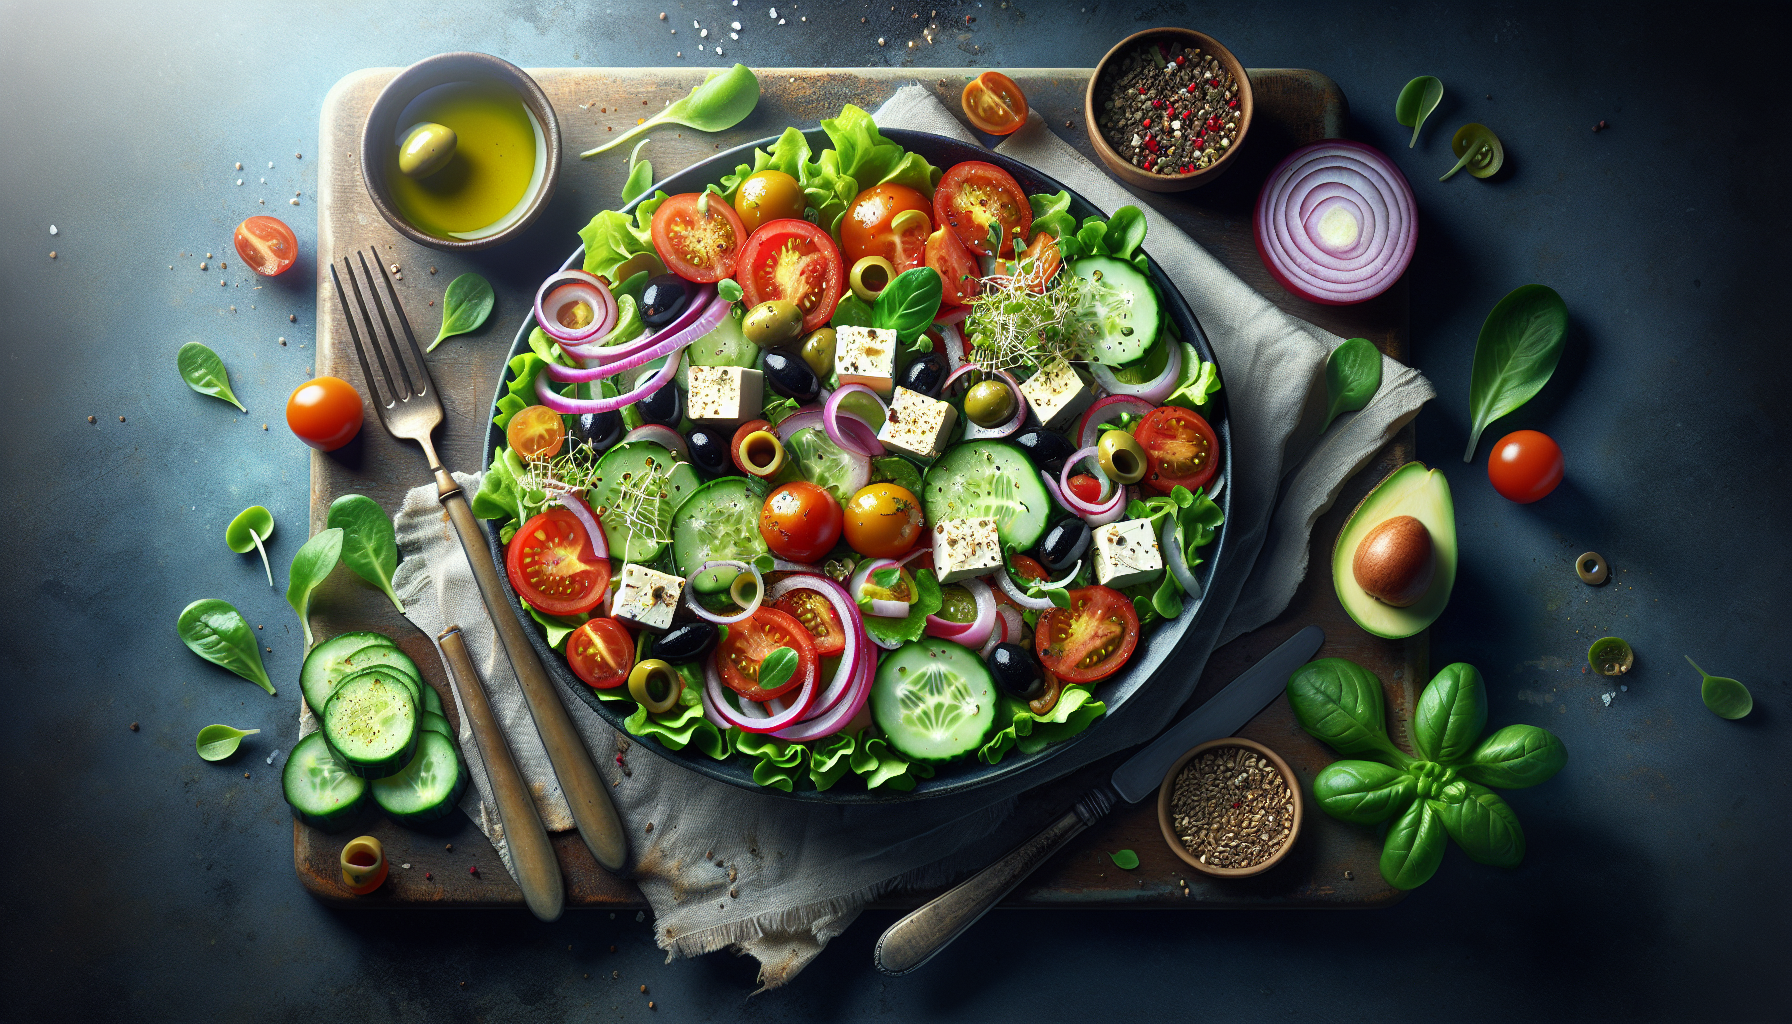 Whats Your Healthy Twist On A Comforting Greek Salad For A Light Lunch?